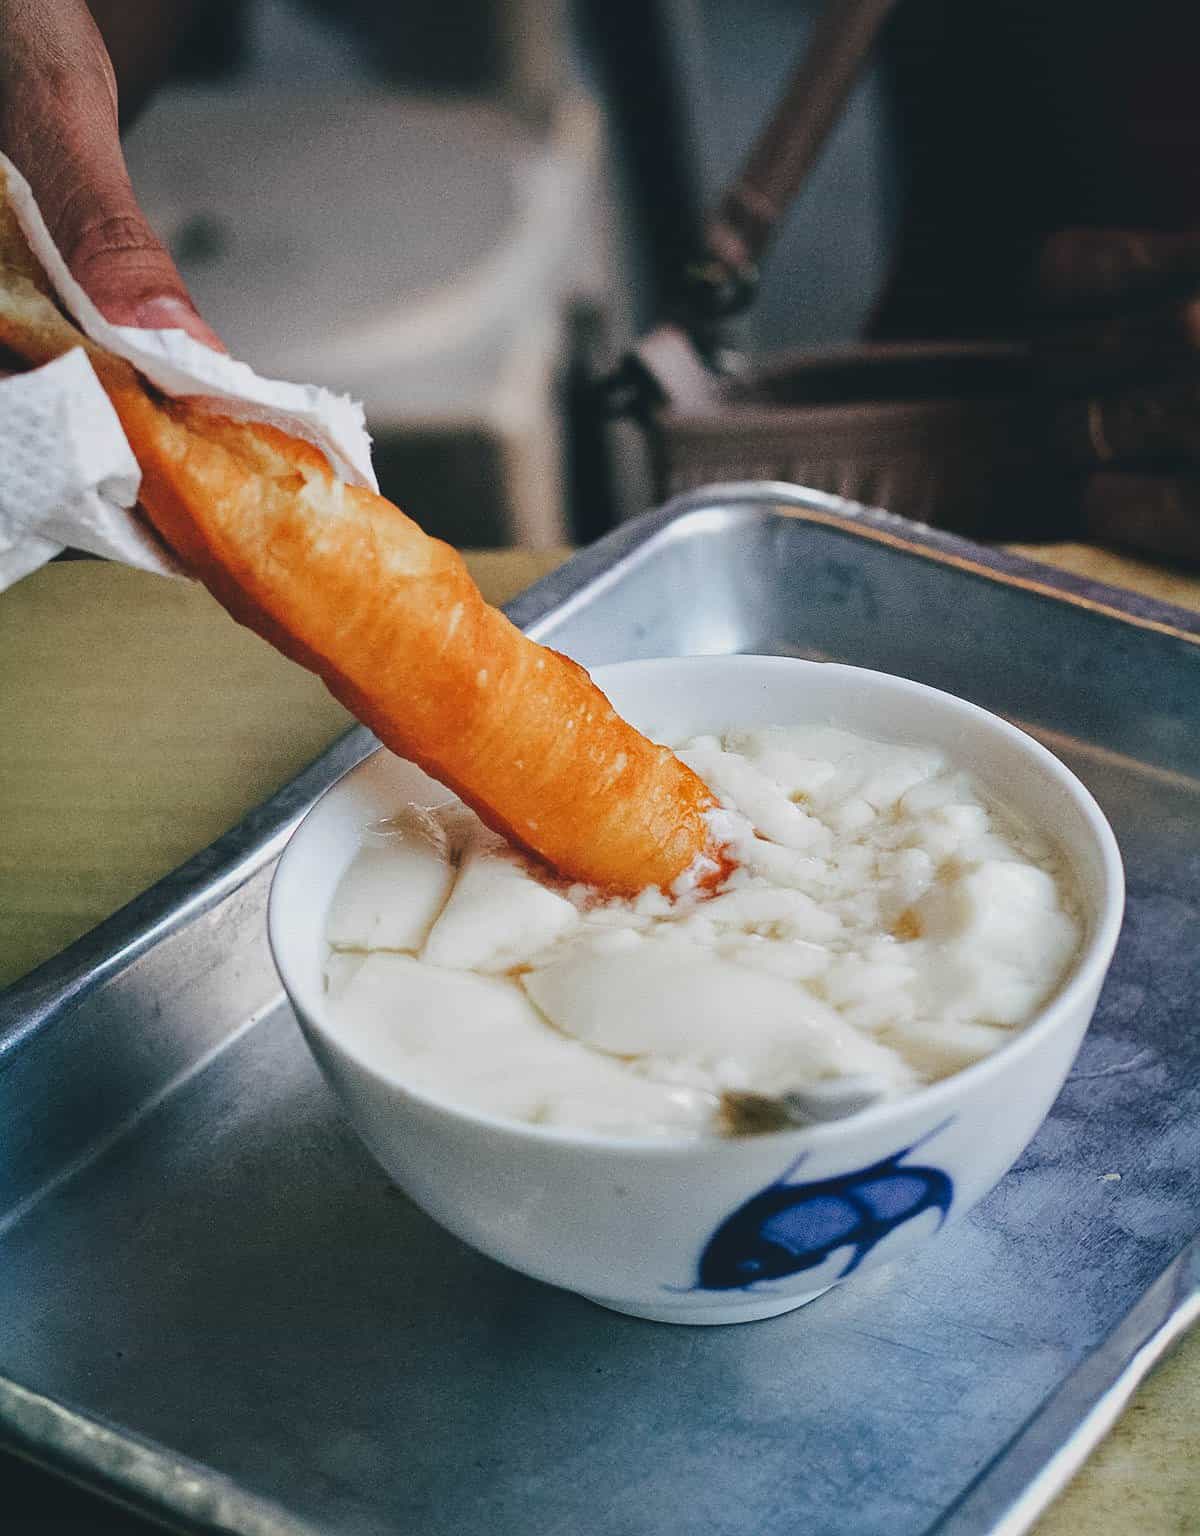 Dipping the dough stick in the bean curd in Singapore